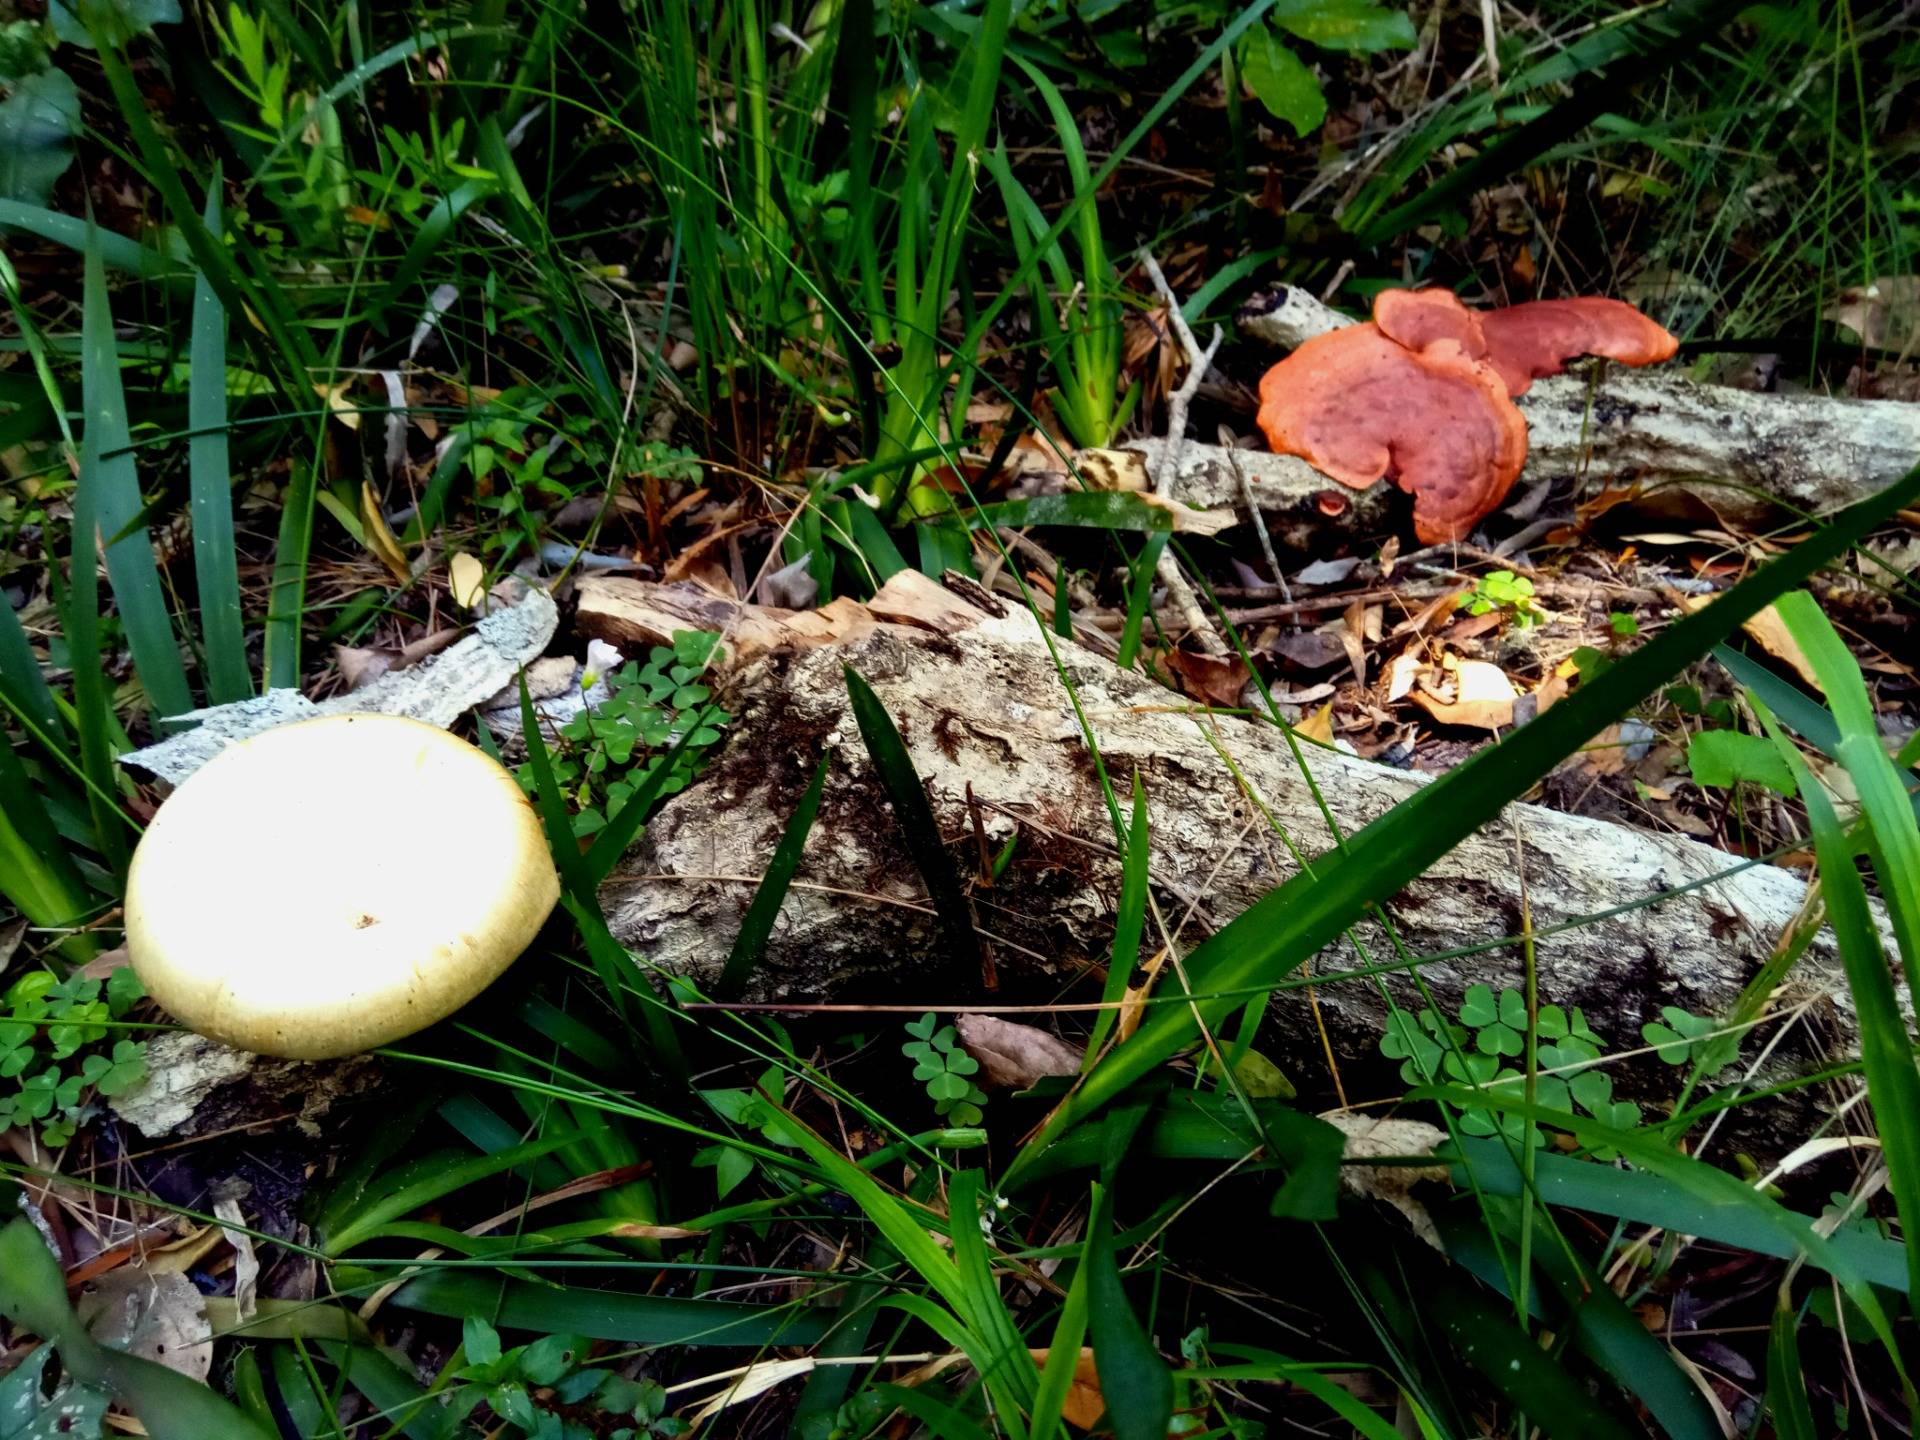 Two types of mushroom. A sign of good forest health.